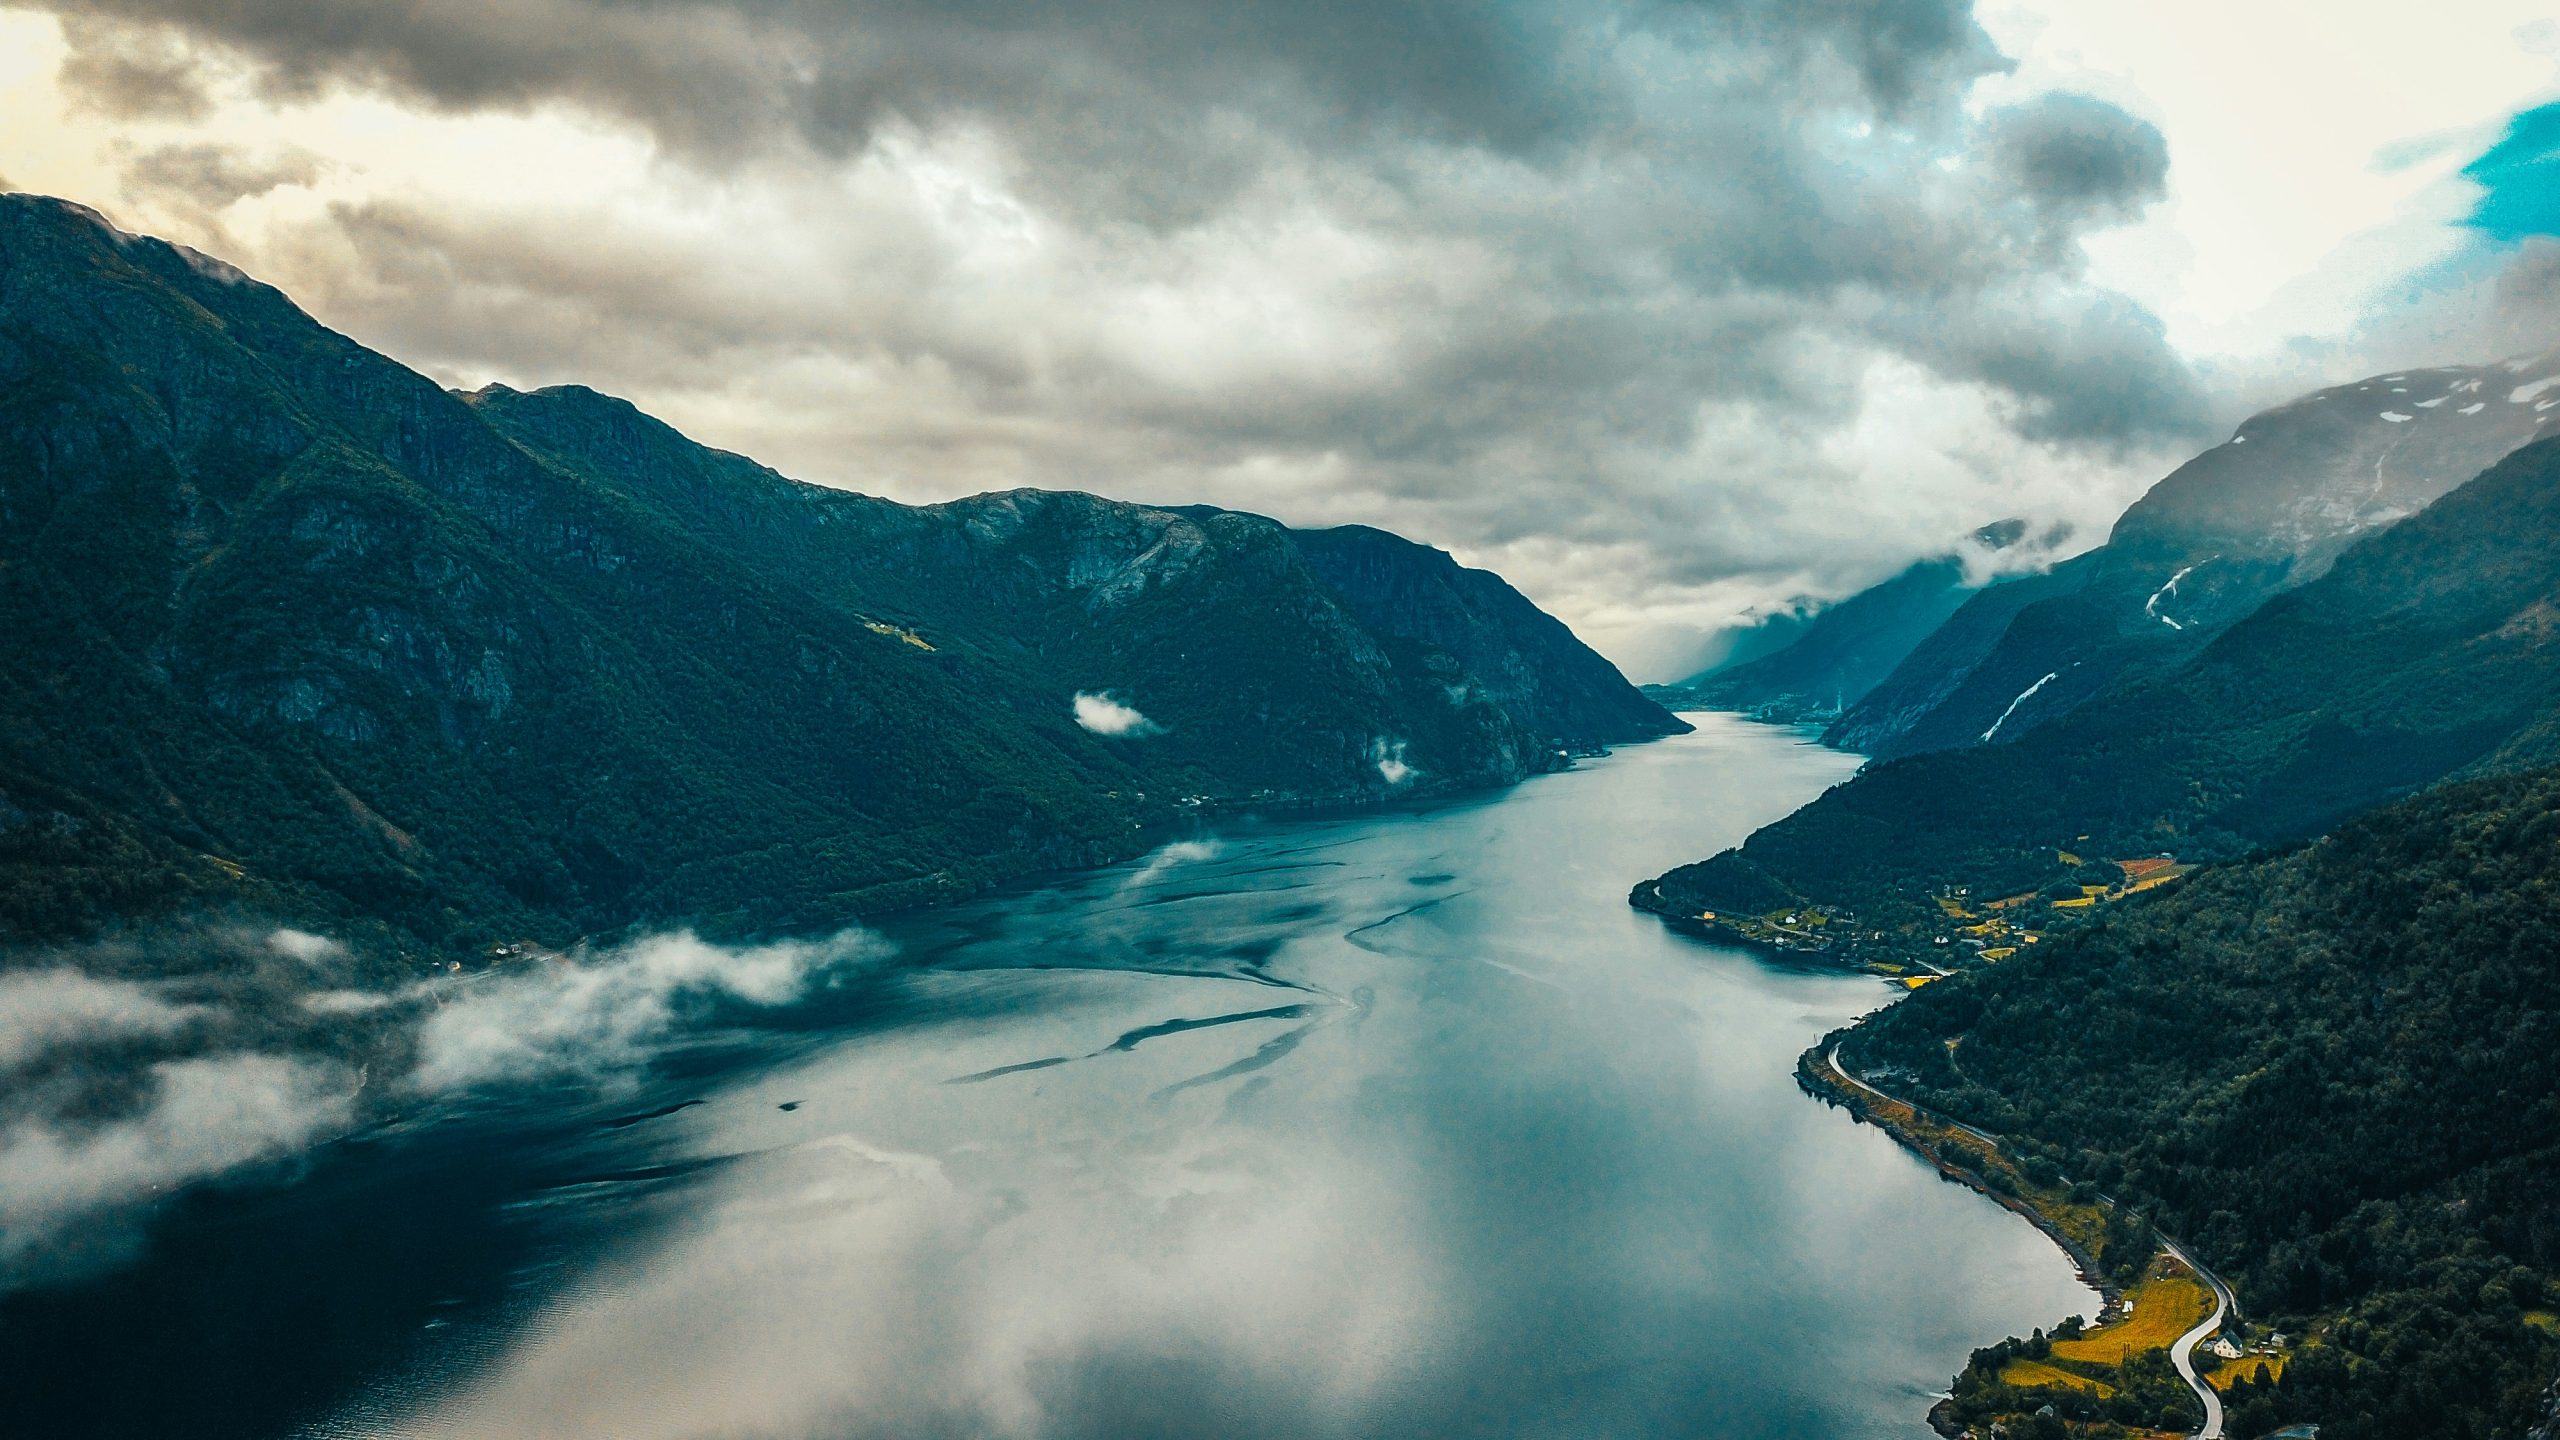 explore the stunning fjords of scandinavia and witness breathtaking natural landscapes on your next adventure.